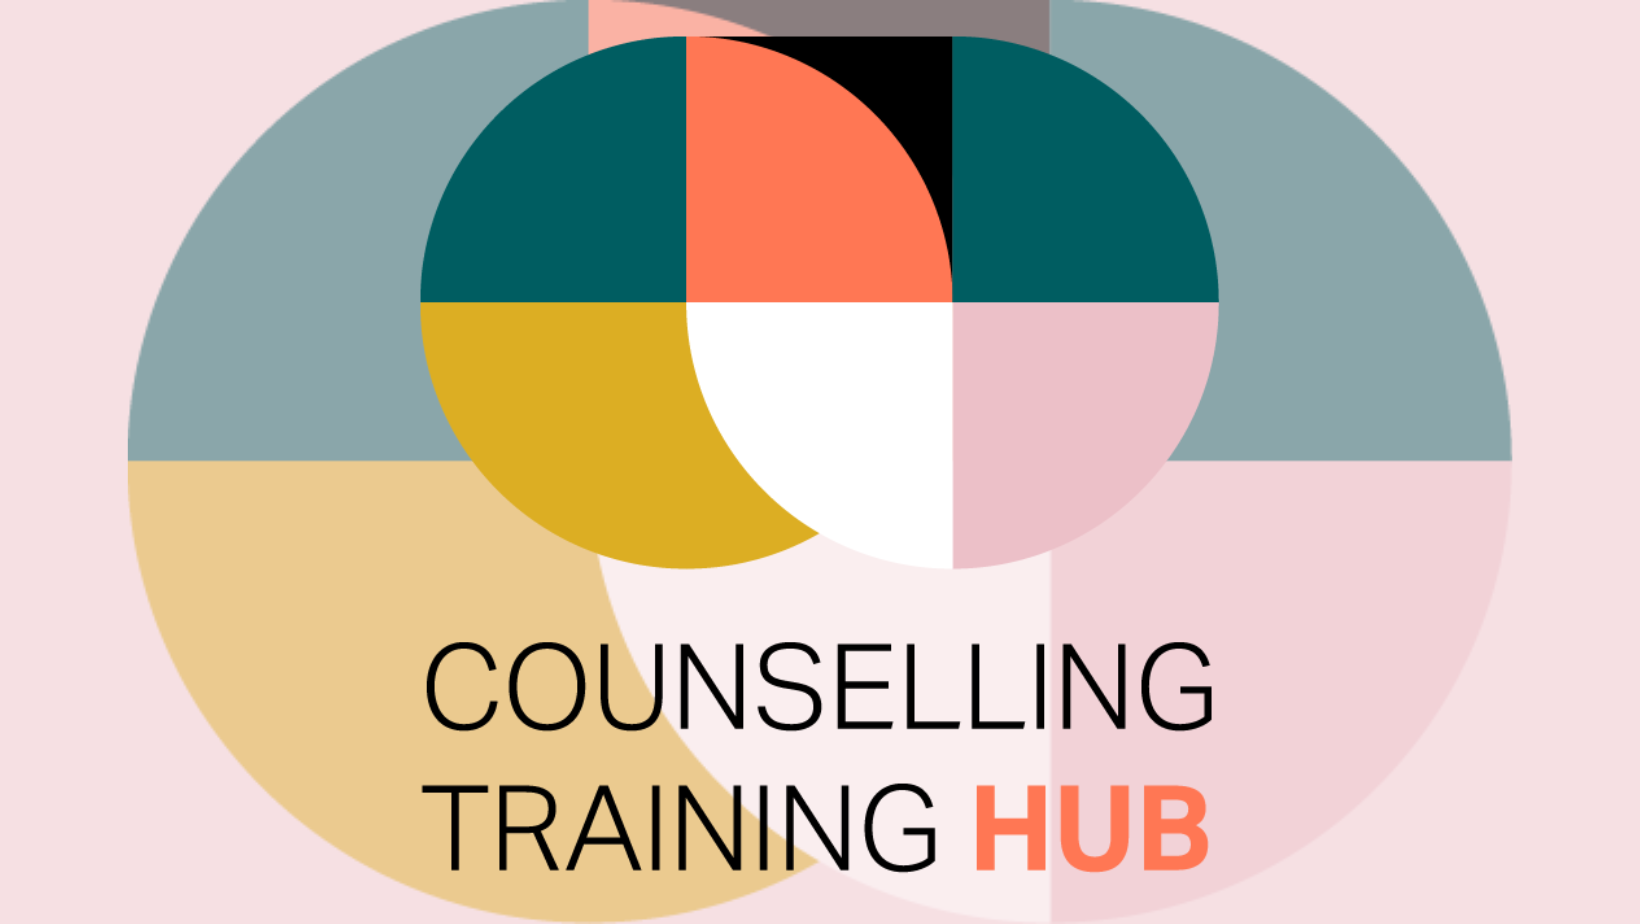 Counselling Training Hub - We are a Dedicated Counselling training Team